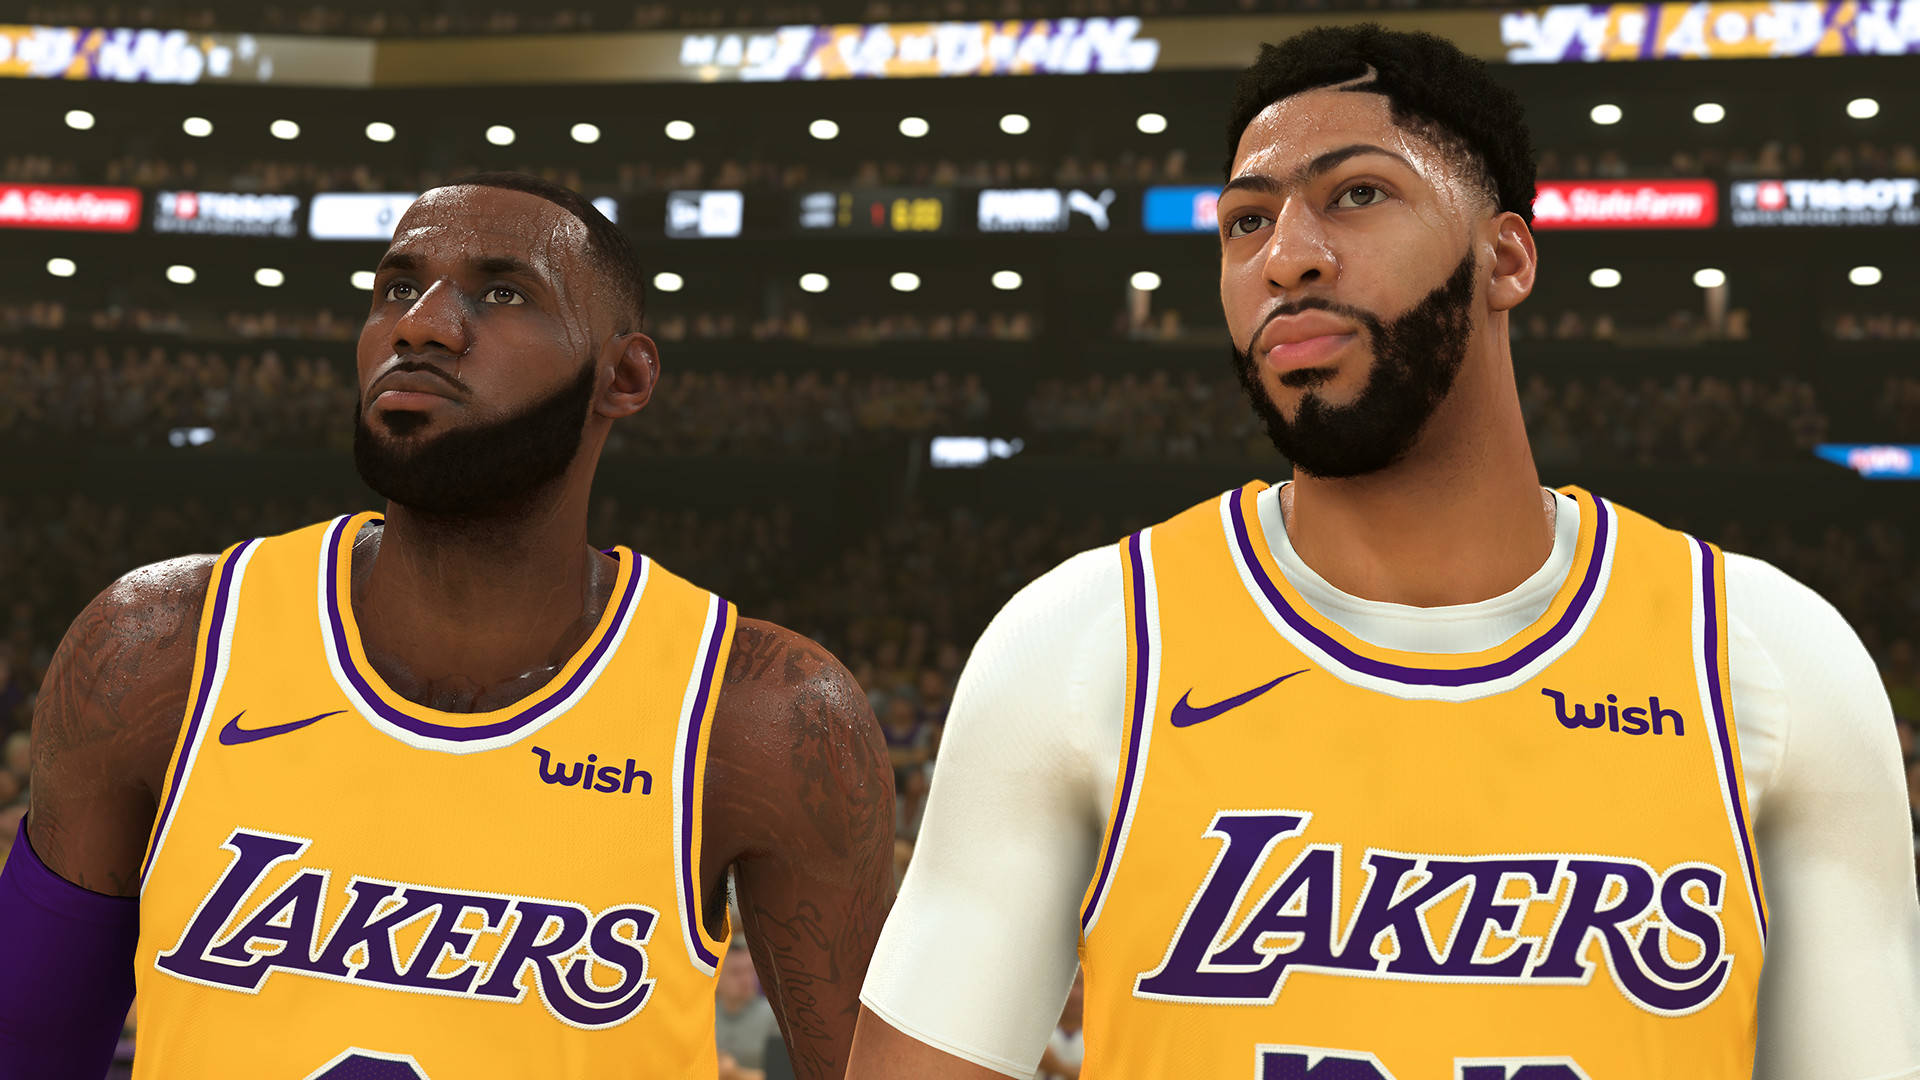 Top 10 things about NBA 2k